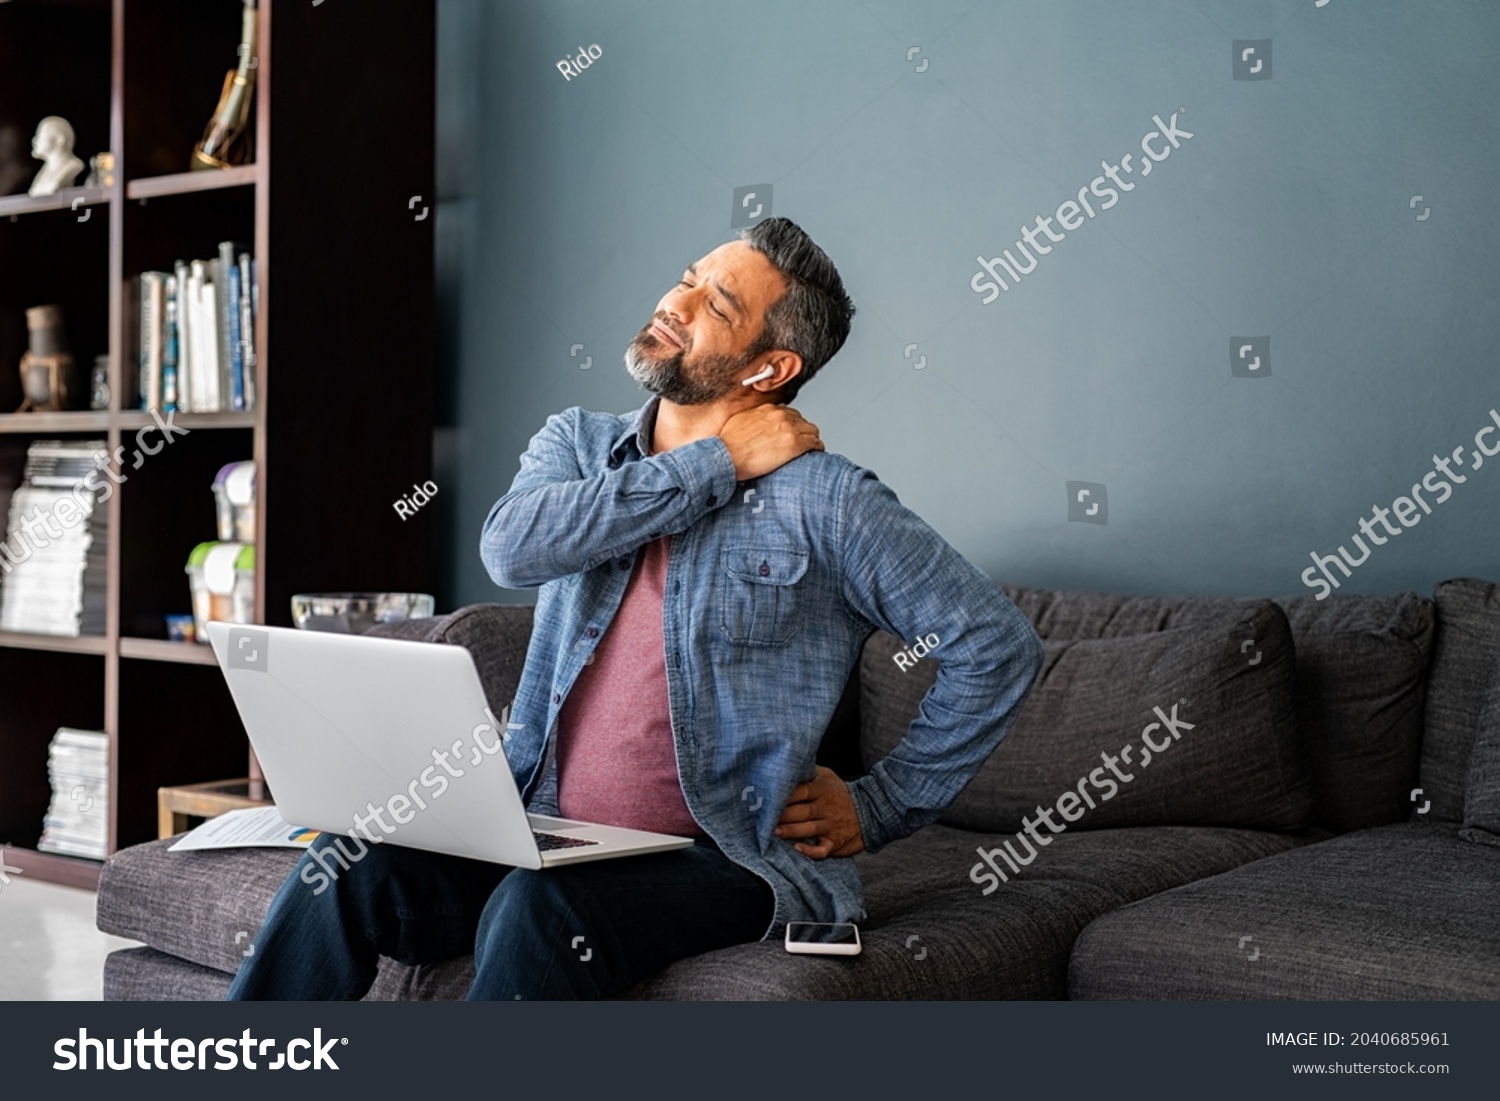 Mature indian man suffering from shoulder and back pain while sitting on couch and working from home on laptop. Stressed middle eastern businessman suffering from neck pain and stretching. #2040685961